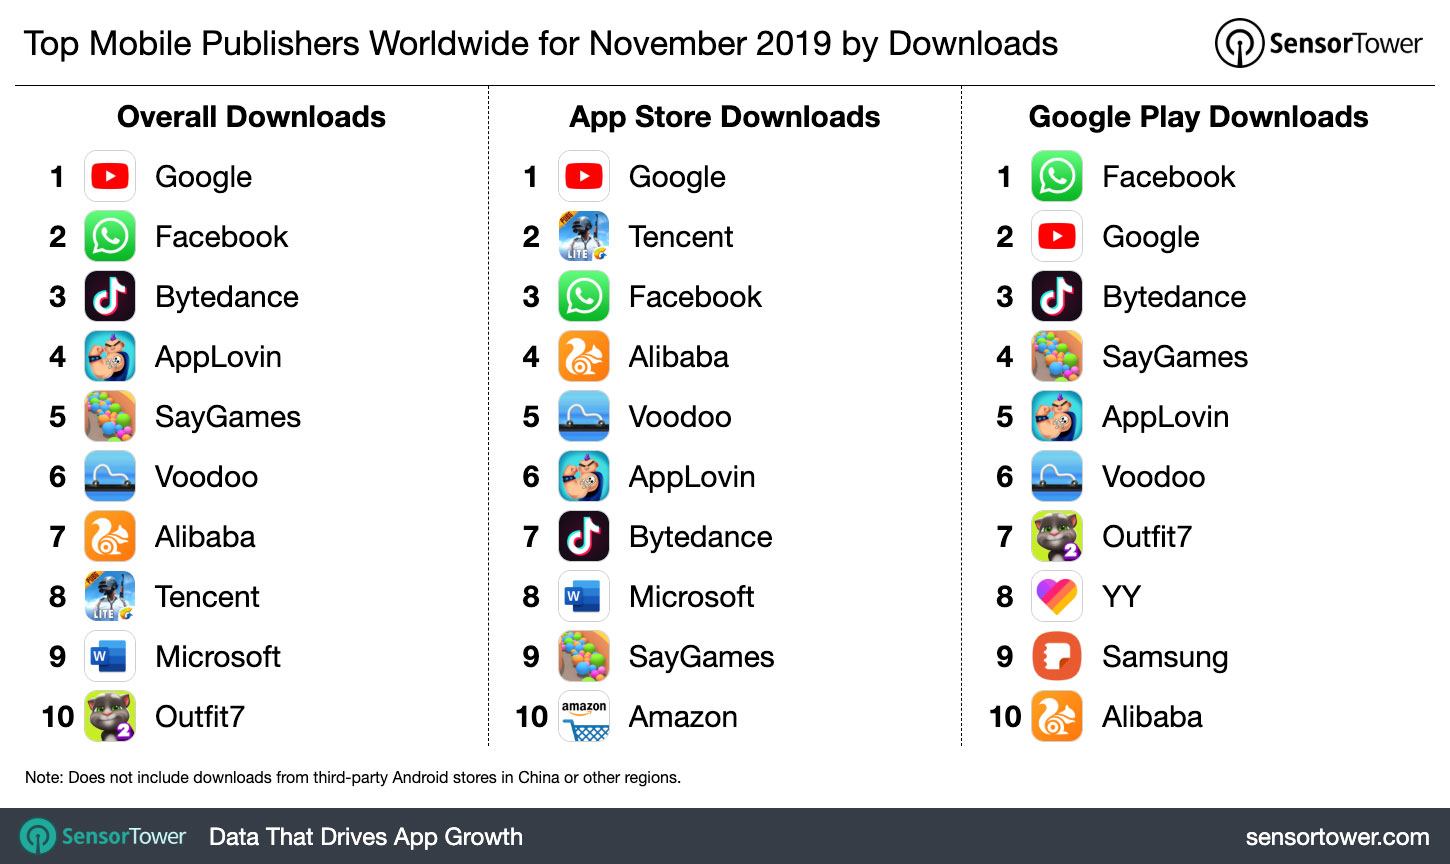 Top Mobile Publishers Worldwide for November 2019 by Downloads